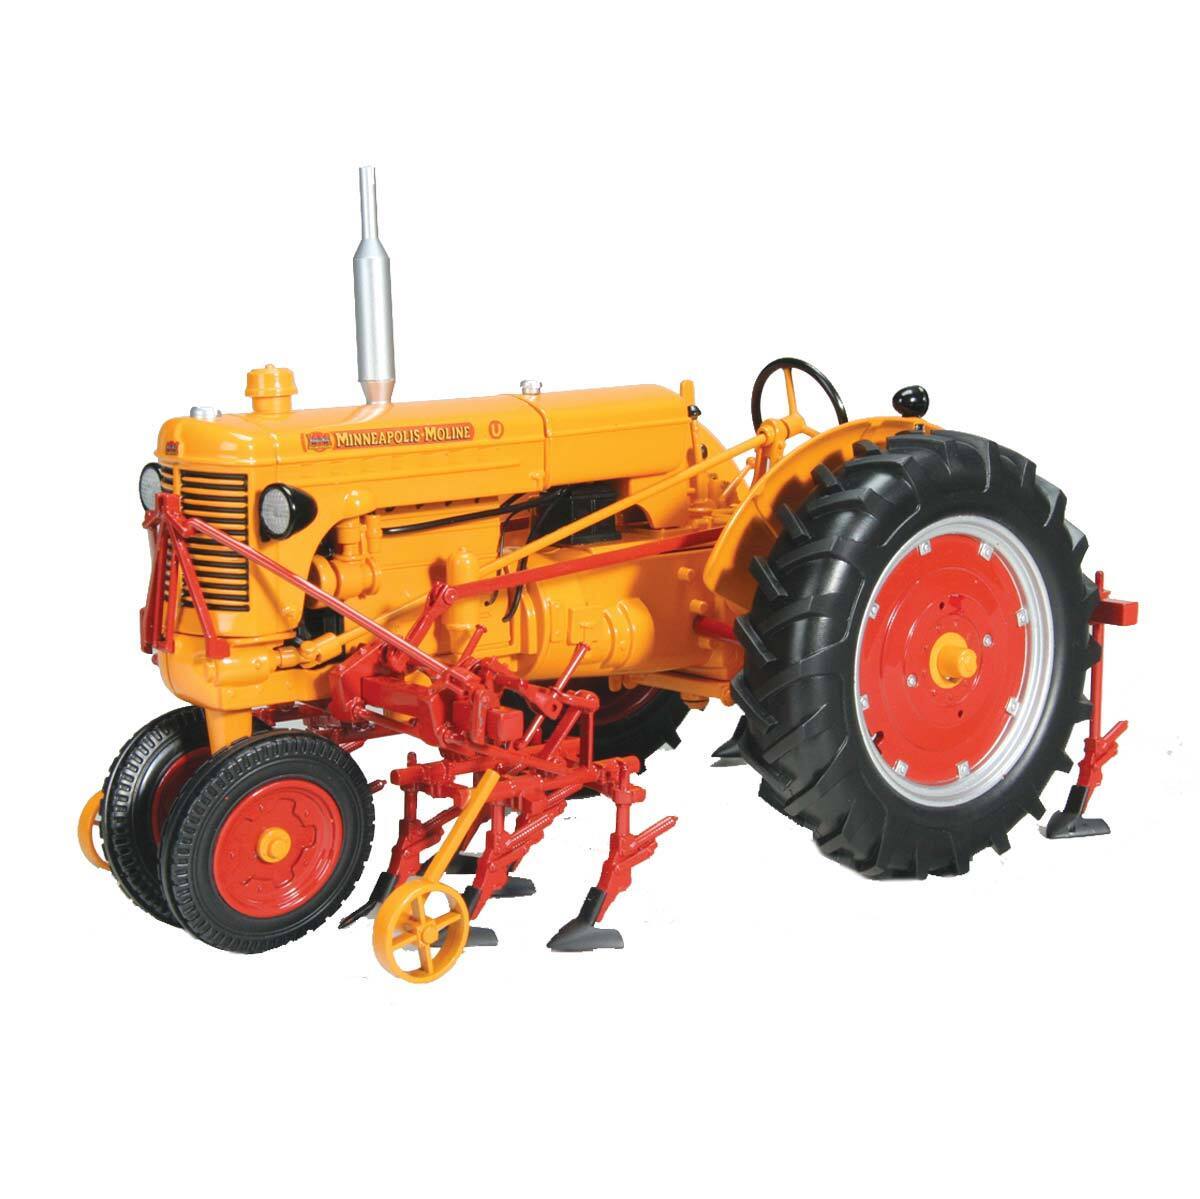 1:16 Scale Minneapolis Moline U Gas with 2 Row Cultivator SCT391 by SpecCast